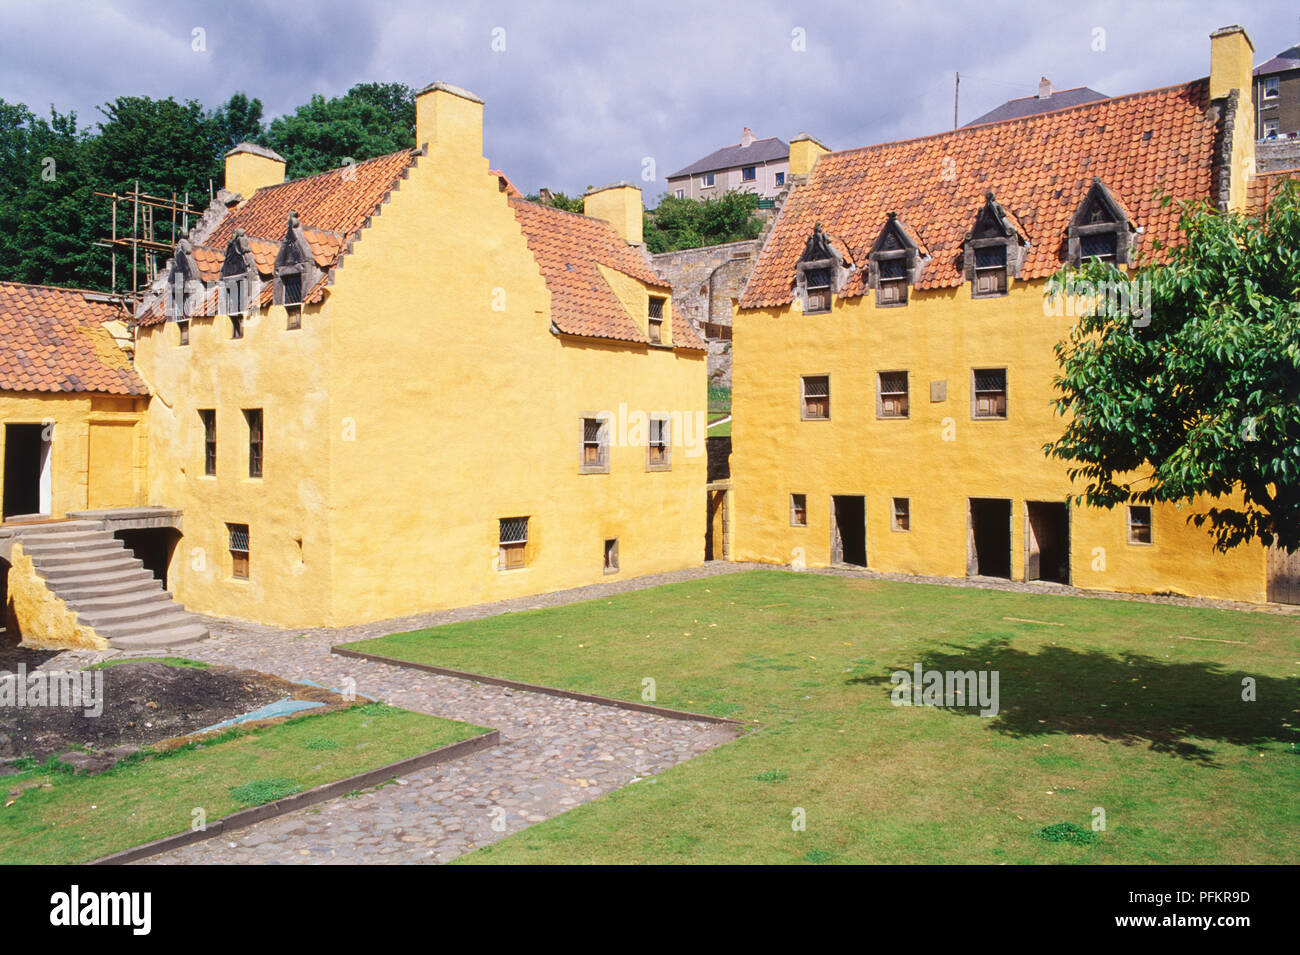 Great Britain, Scotland, Fife, Culross, a sixteenth-century palace of industrialist George Bruce. crow-stepped gables, decorated windows and red pantiles, all typical of the period. Stock Photo